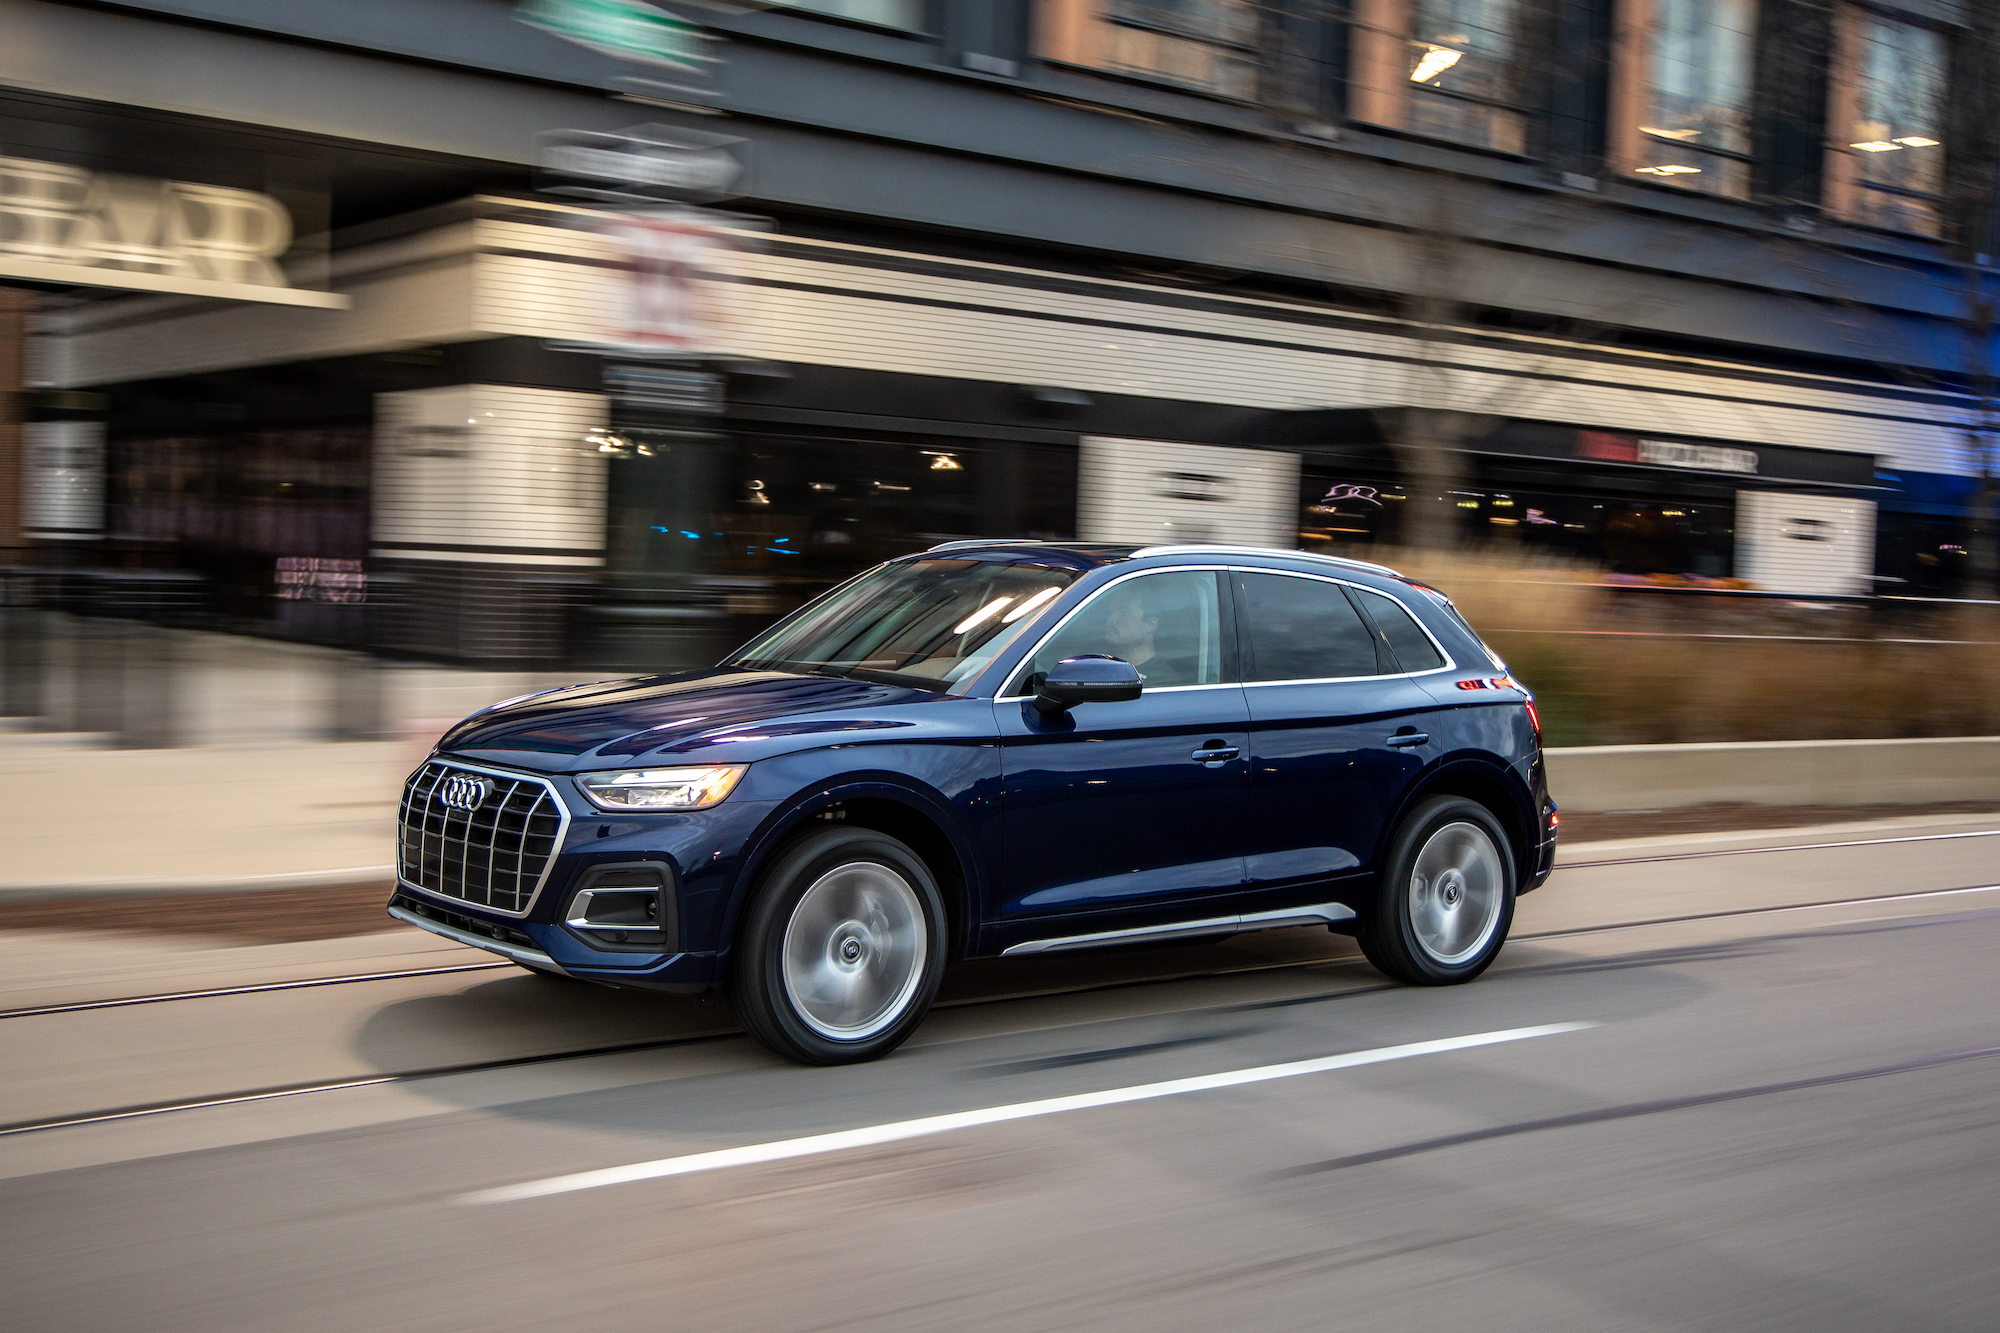 A dark-blue 2021 Audi Q5 compact SUV traveling on a city street